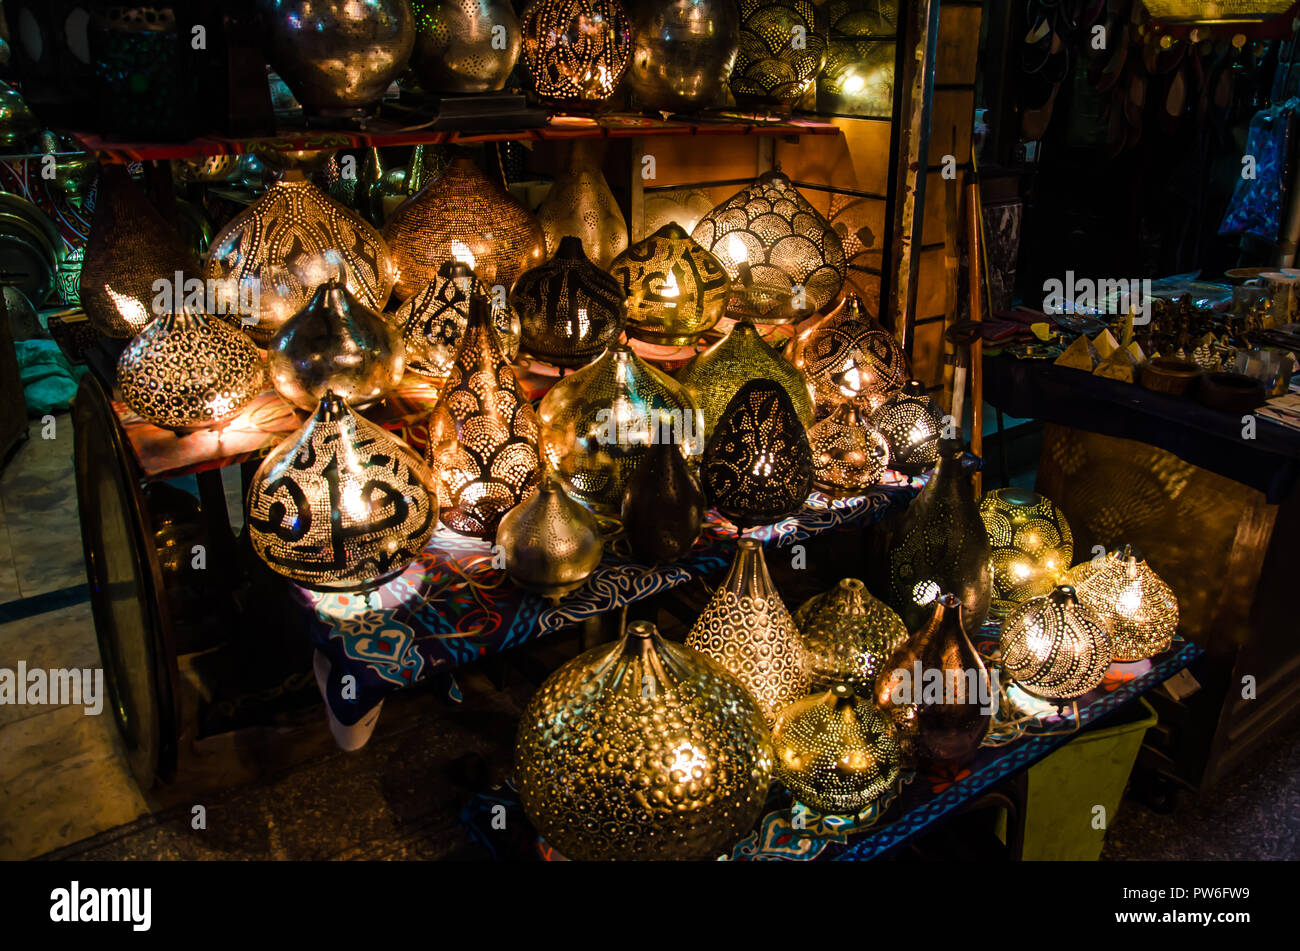 Cairo, Egypt - April 2018. Typical hand made Craftwork store in Cairo souk. Stock Photo